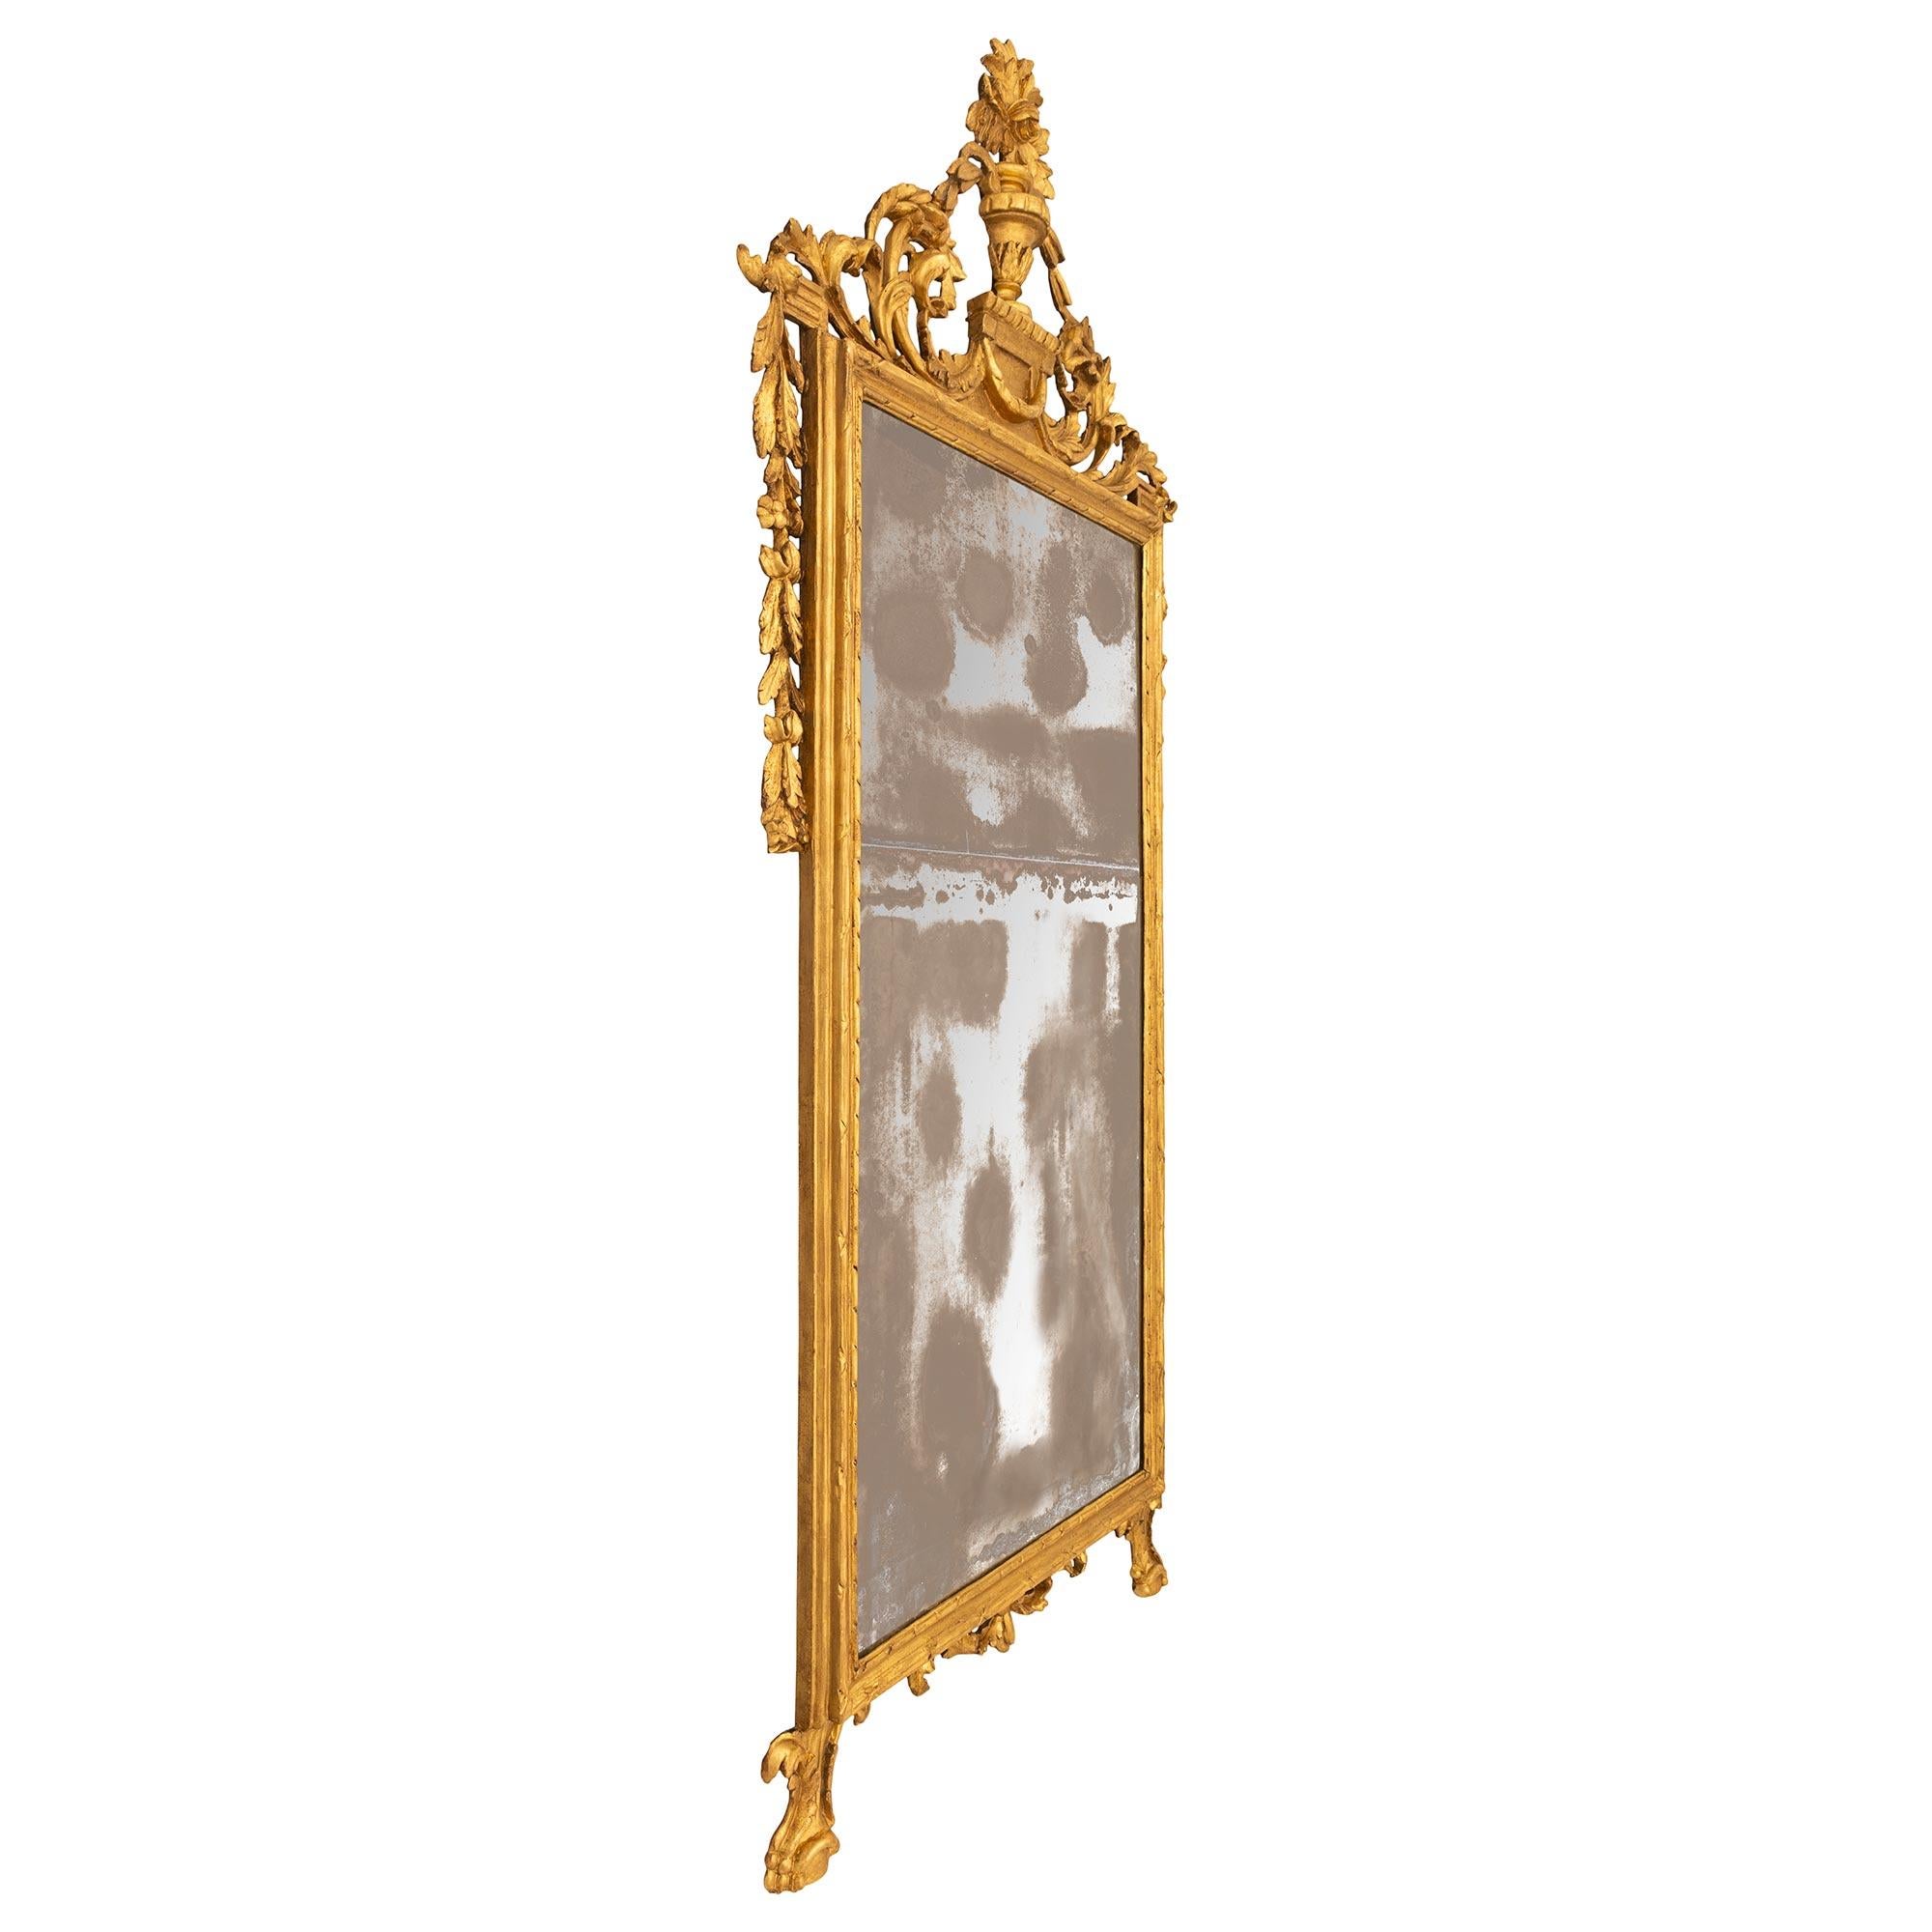 An elegant and large scale Italian 18th century Louis XVI st. giltwood mirror. The mirror from the Genovese region is raised by two supporting legs flanking the central reserve of scrolled acanthus leaves. The rectangular mottled giltwood frame is